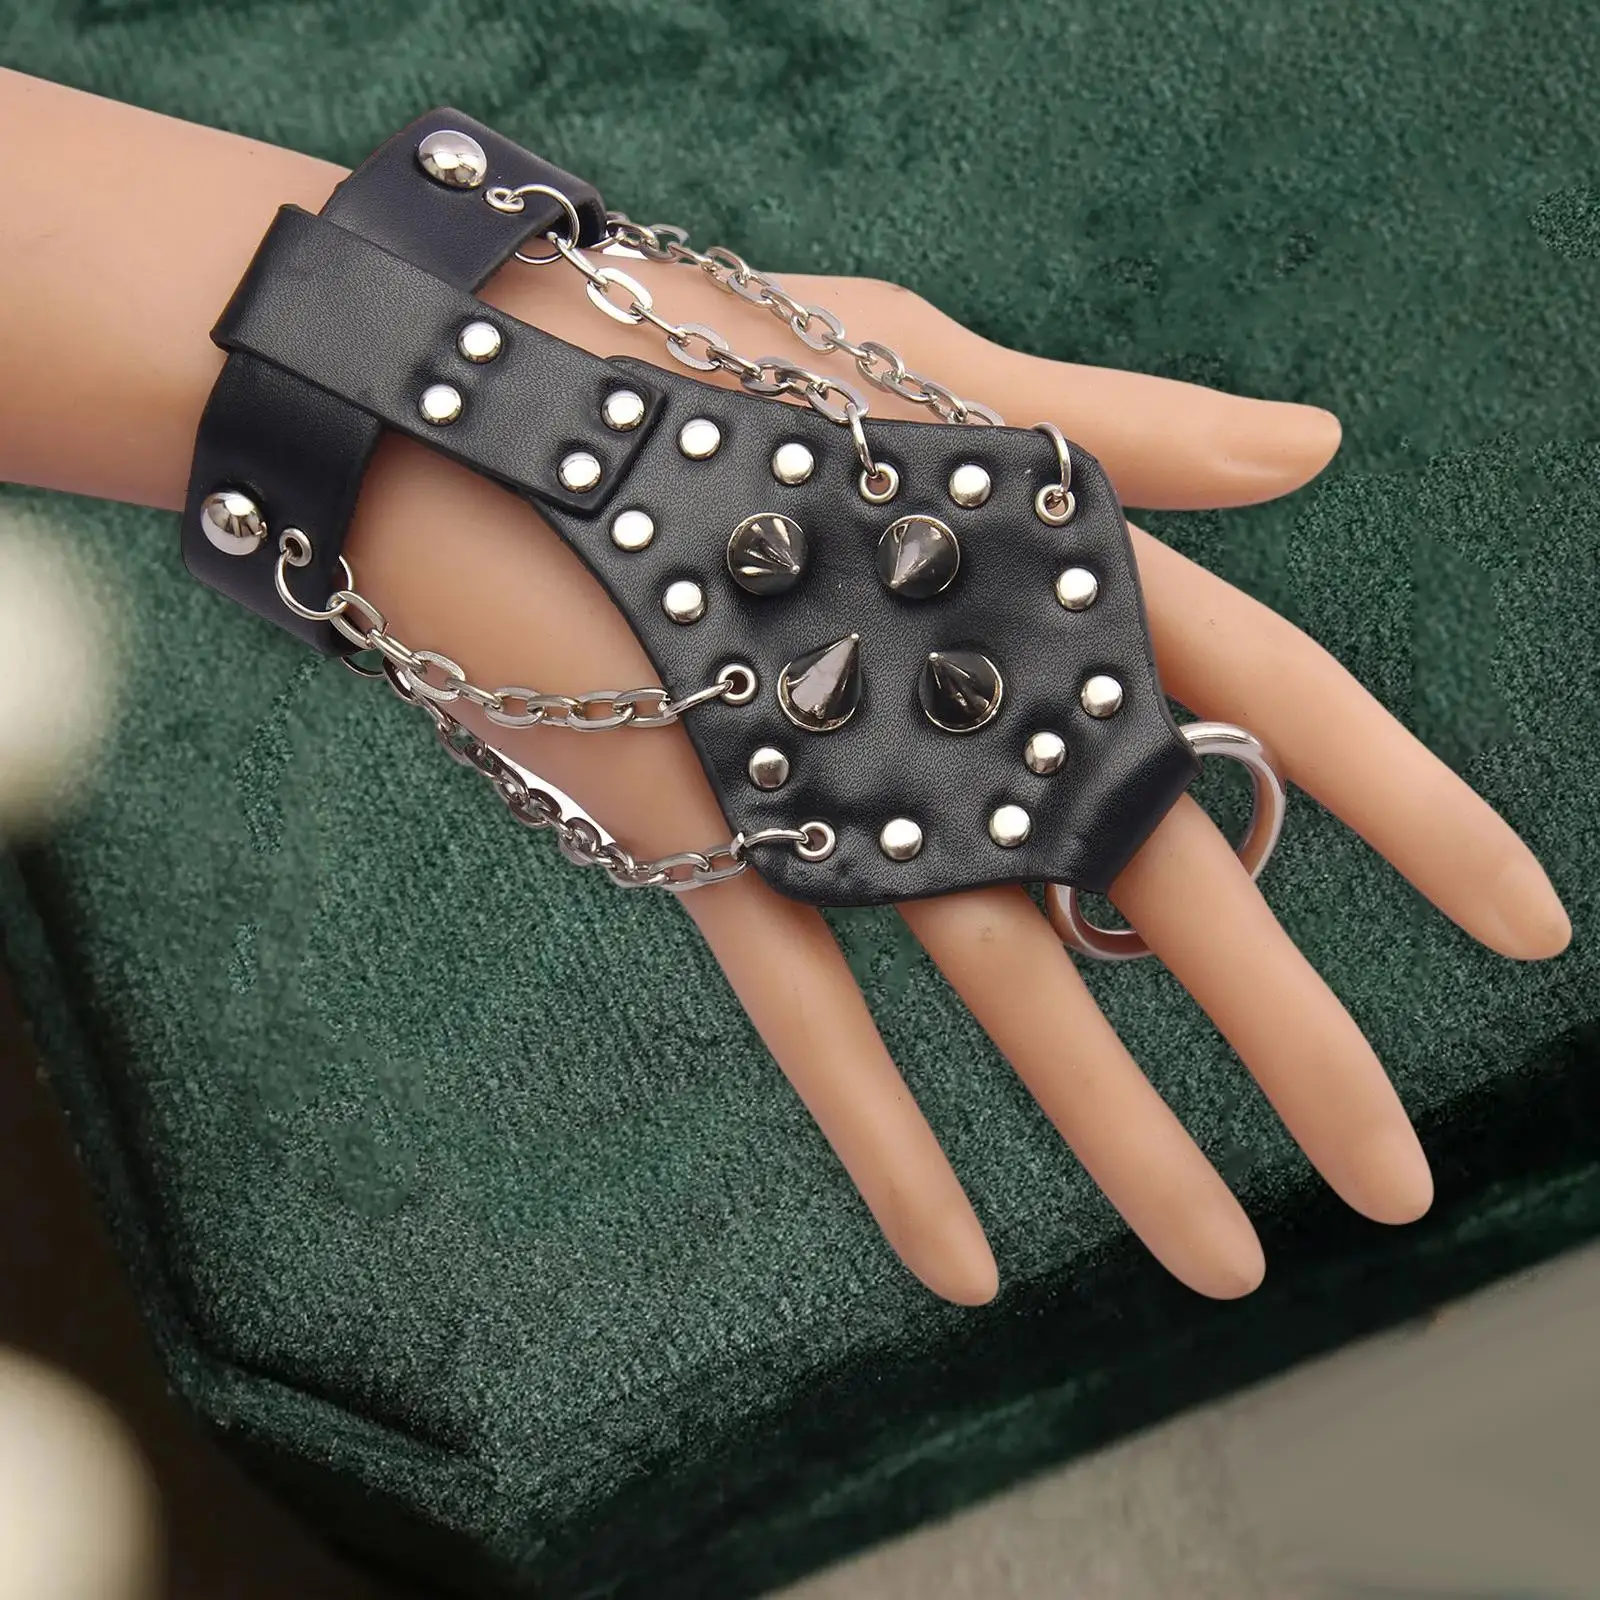 Gothic Gloves Punk Stud Hand Jewelry Wristband for Cosplay Photo Props Decor